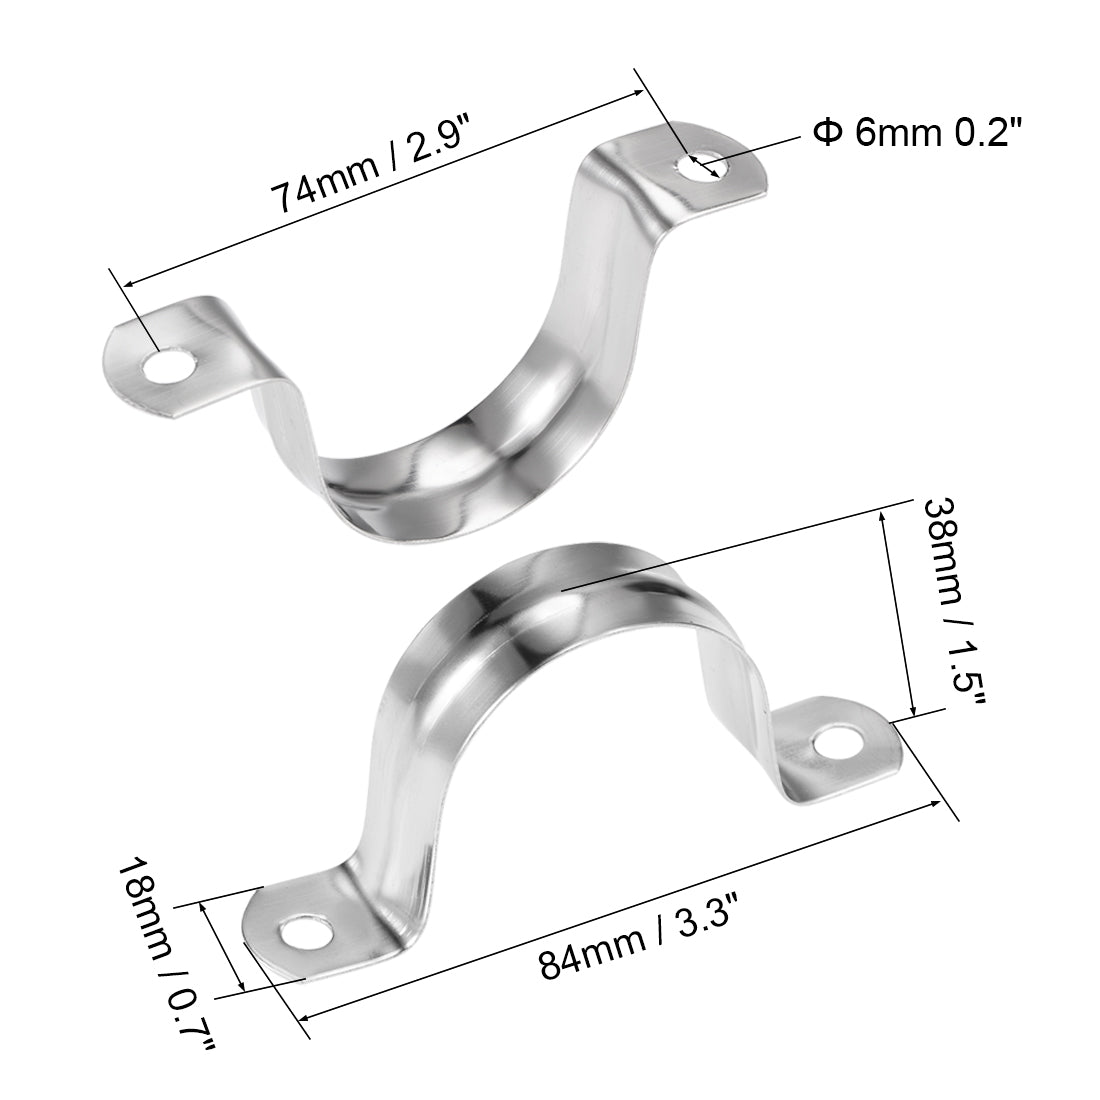 uxcell Uxcell U Shaped Conduit Clamp Saddle Strap Tube Pipe Clip Stainless Steel M40 5Pcs